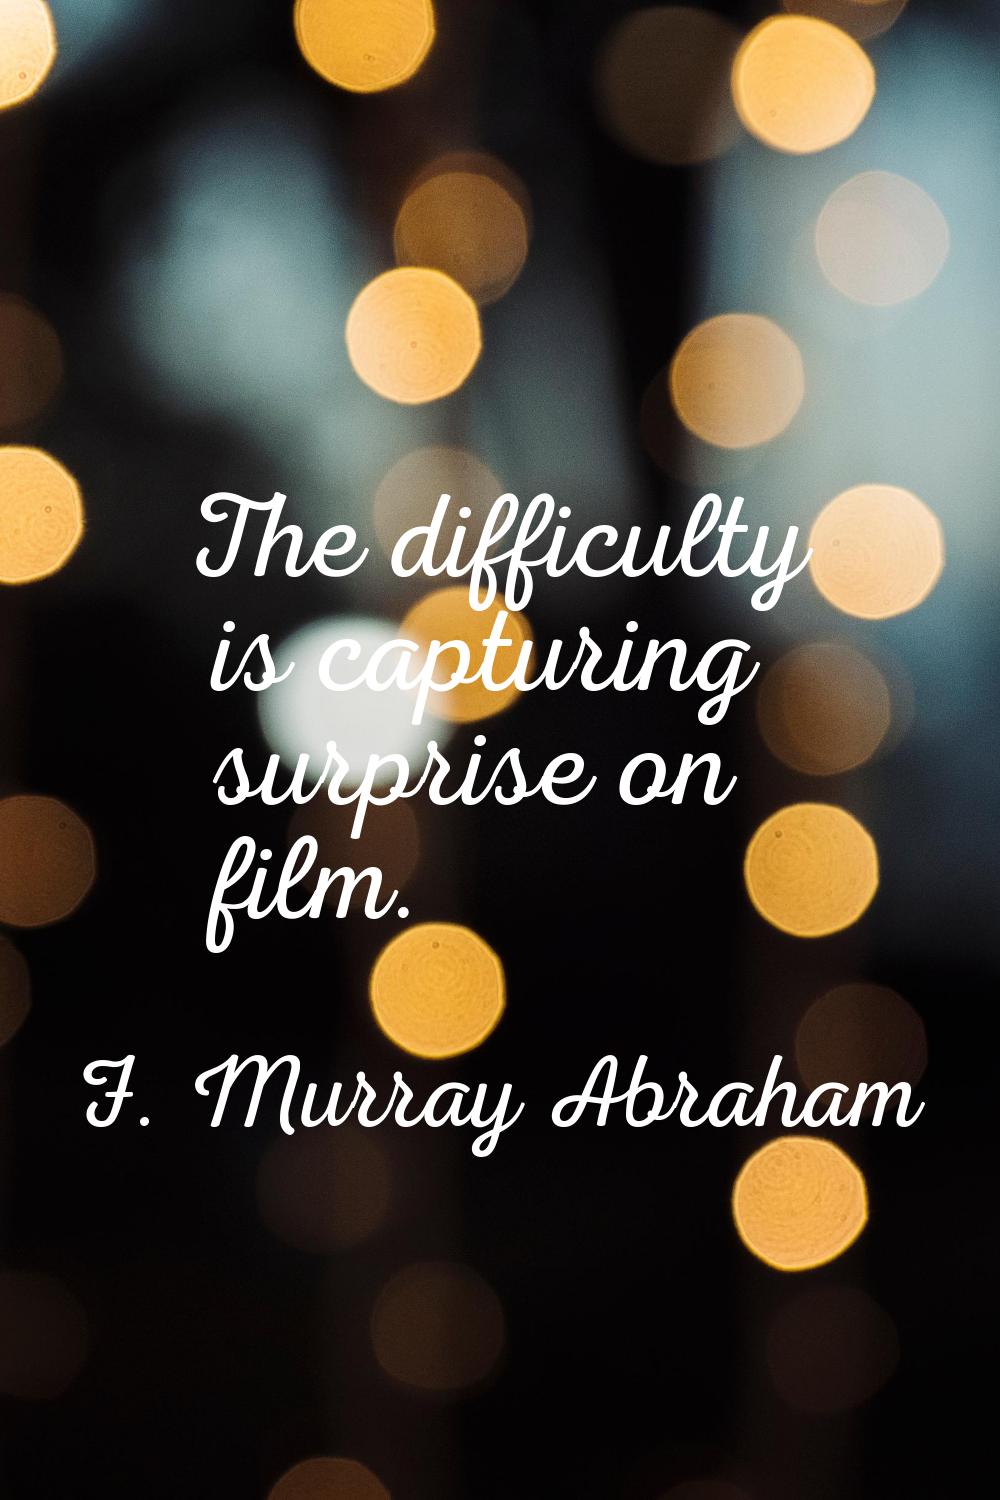 The difficulty is capturing surprise on film.